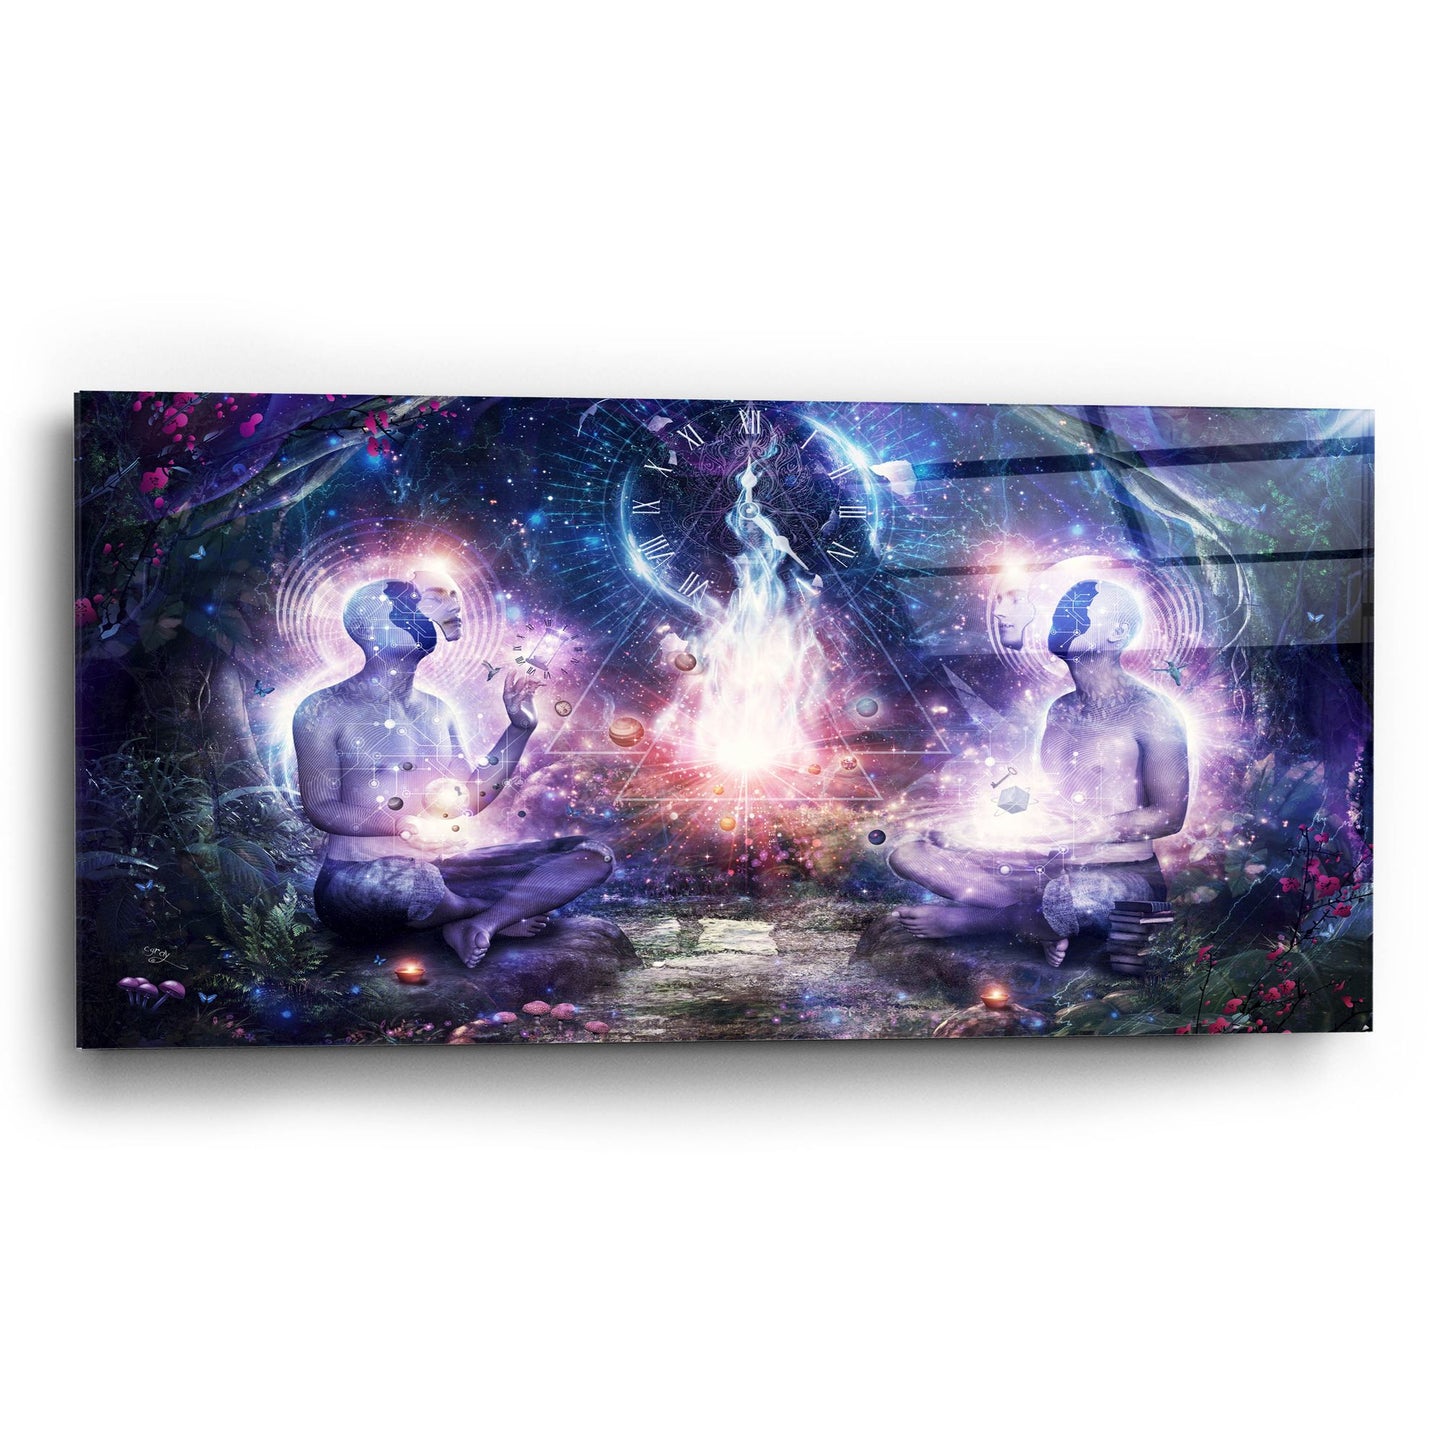 Epic Art 'In The Light Of Knowledge' by Cameron Gray, Acrylic Glass Wall Art,24x12